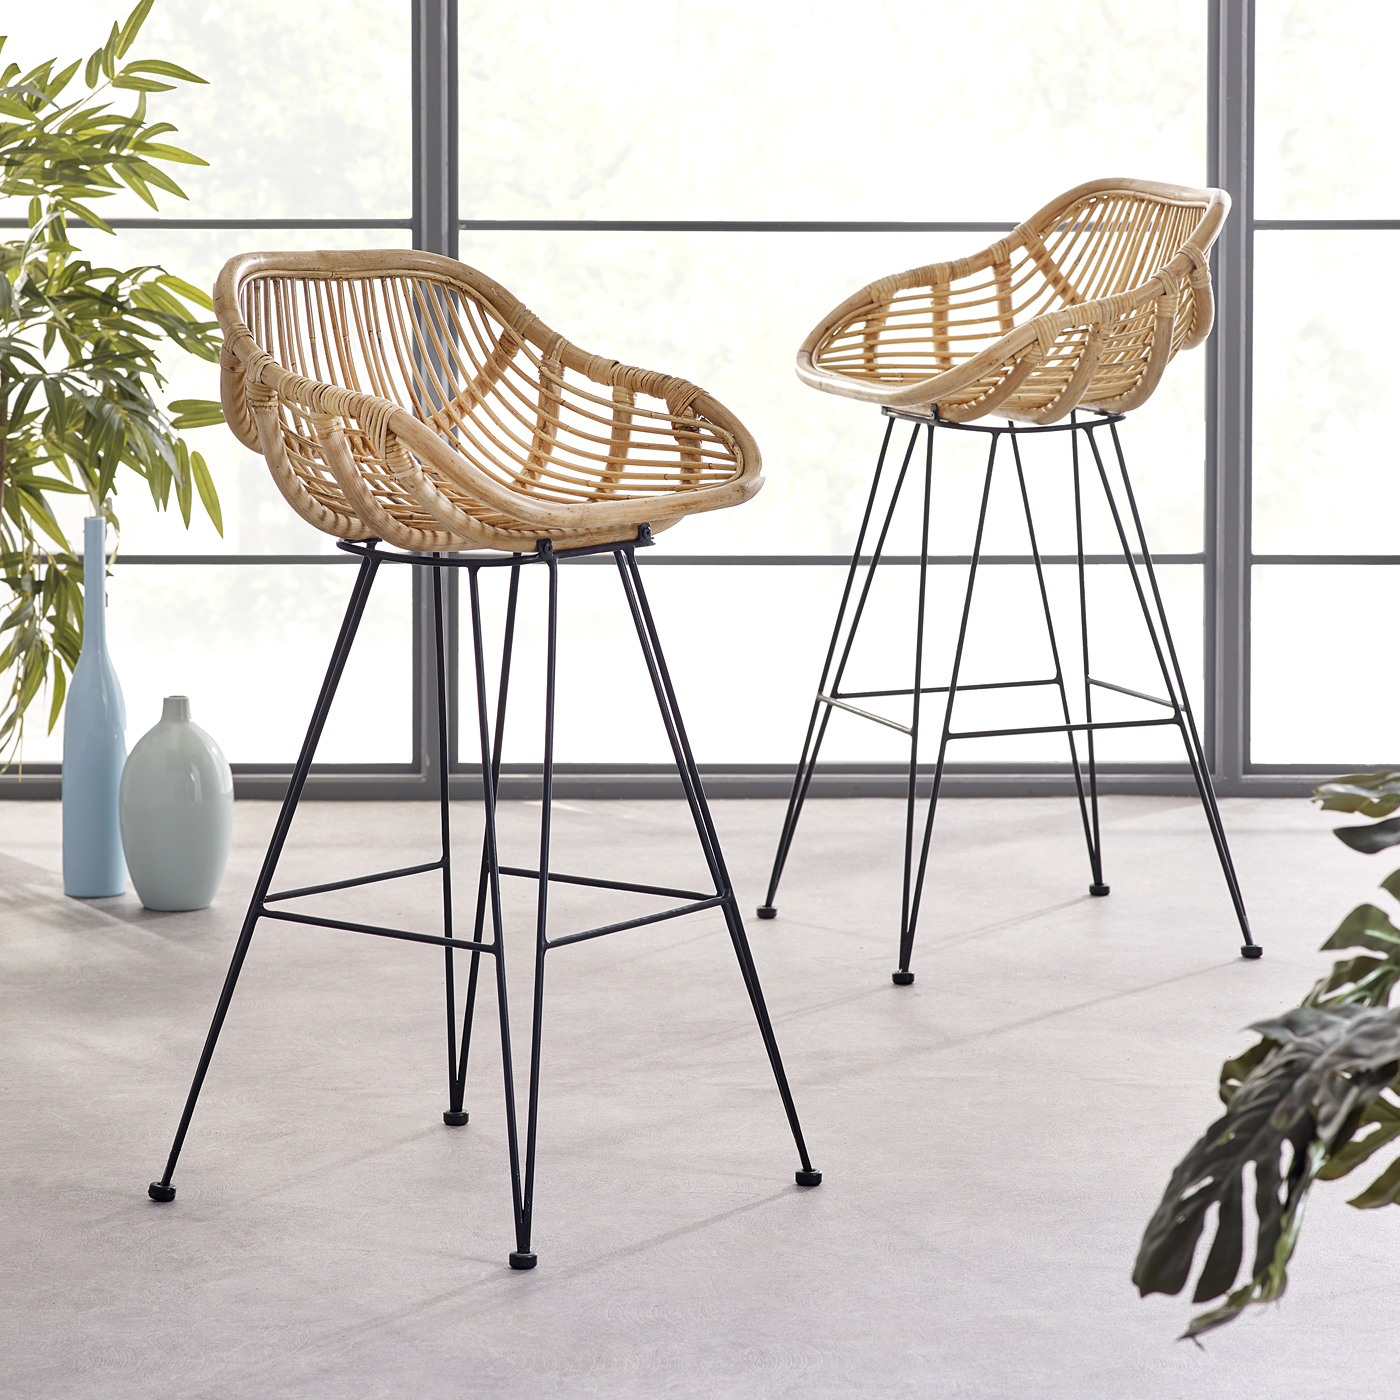 Contemporary Bodan rattan bar stools with woven bucket seats and industrial style black metal legs